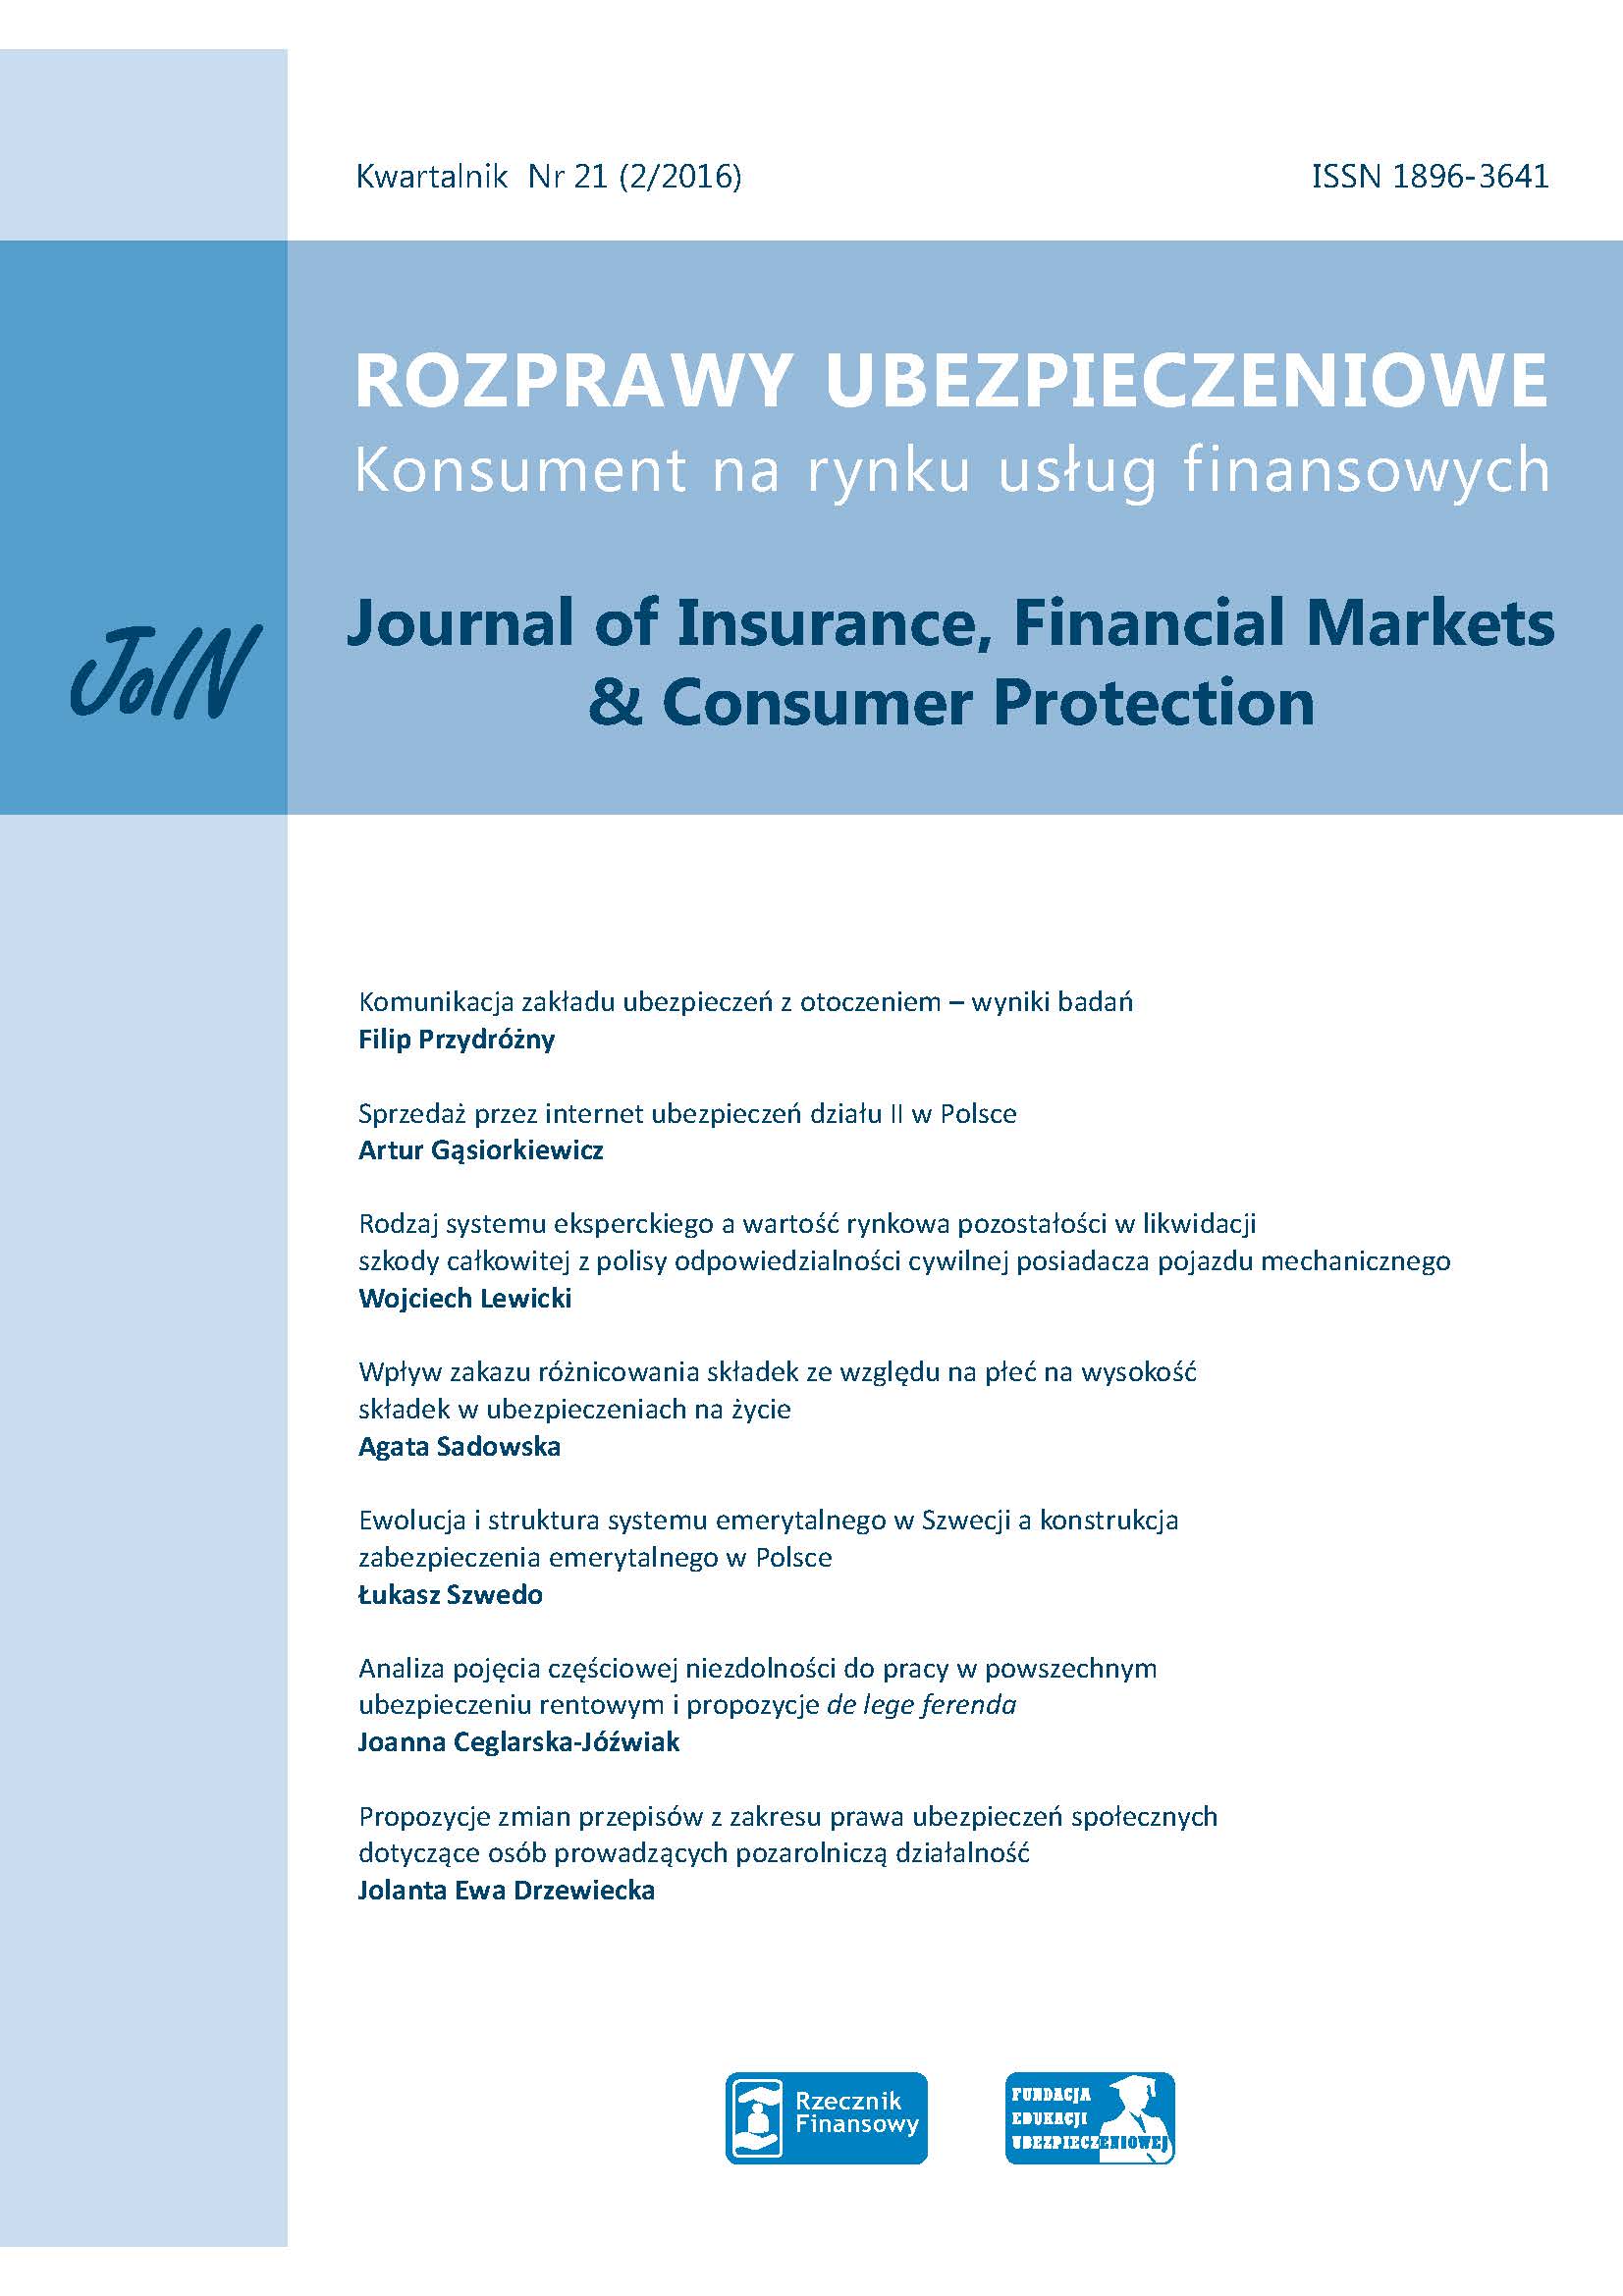 Internet sales of non-life insurance in Poland Cover Image